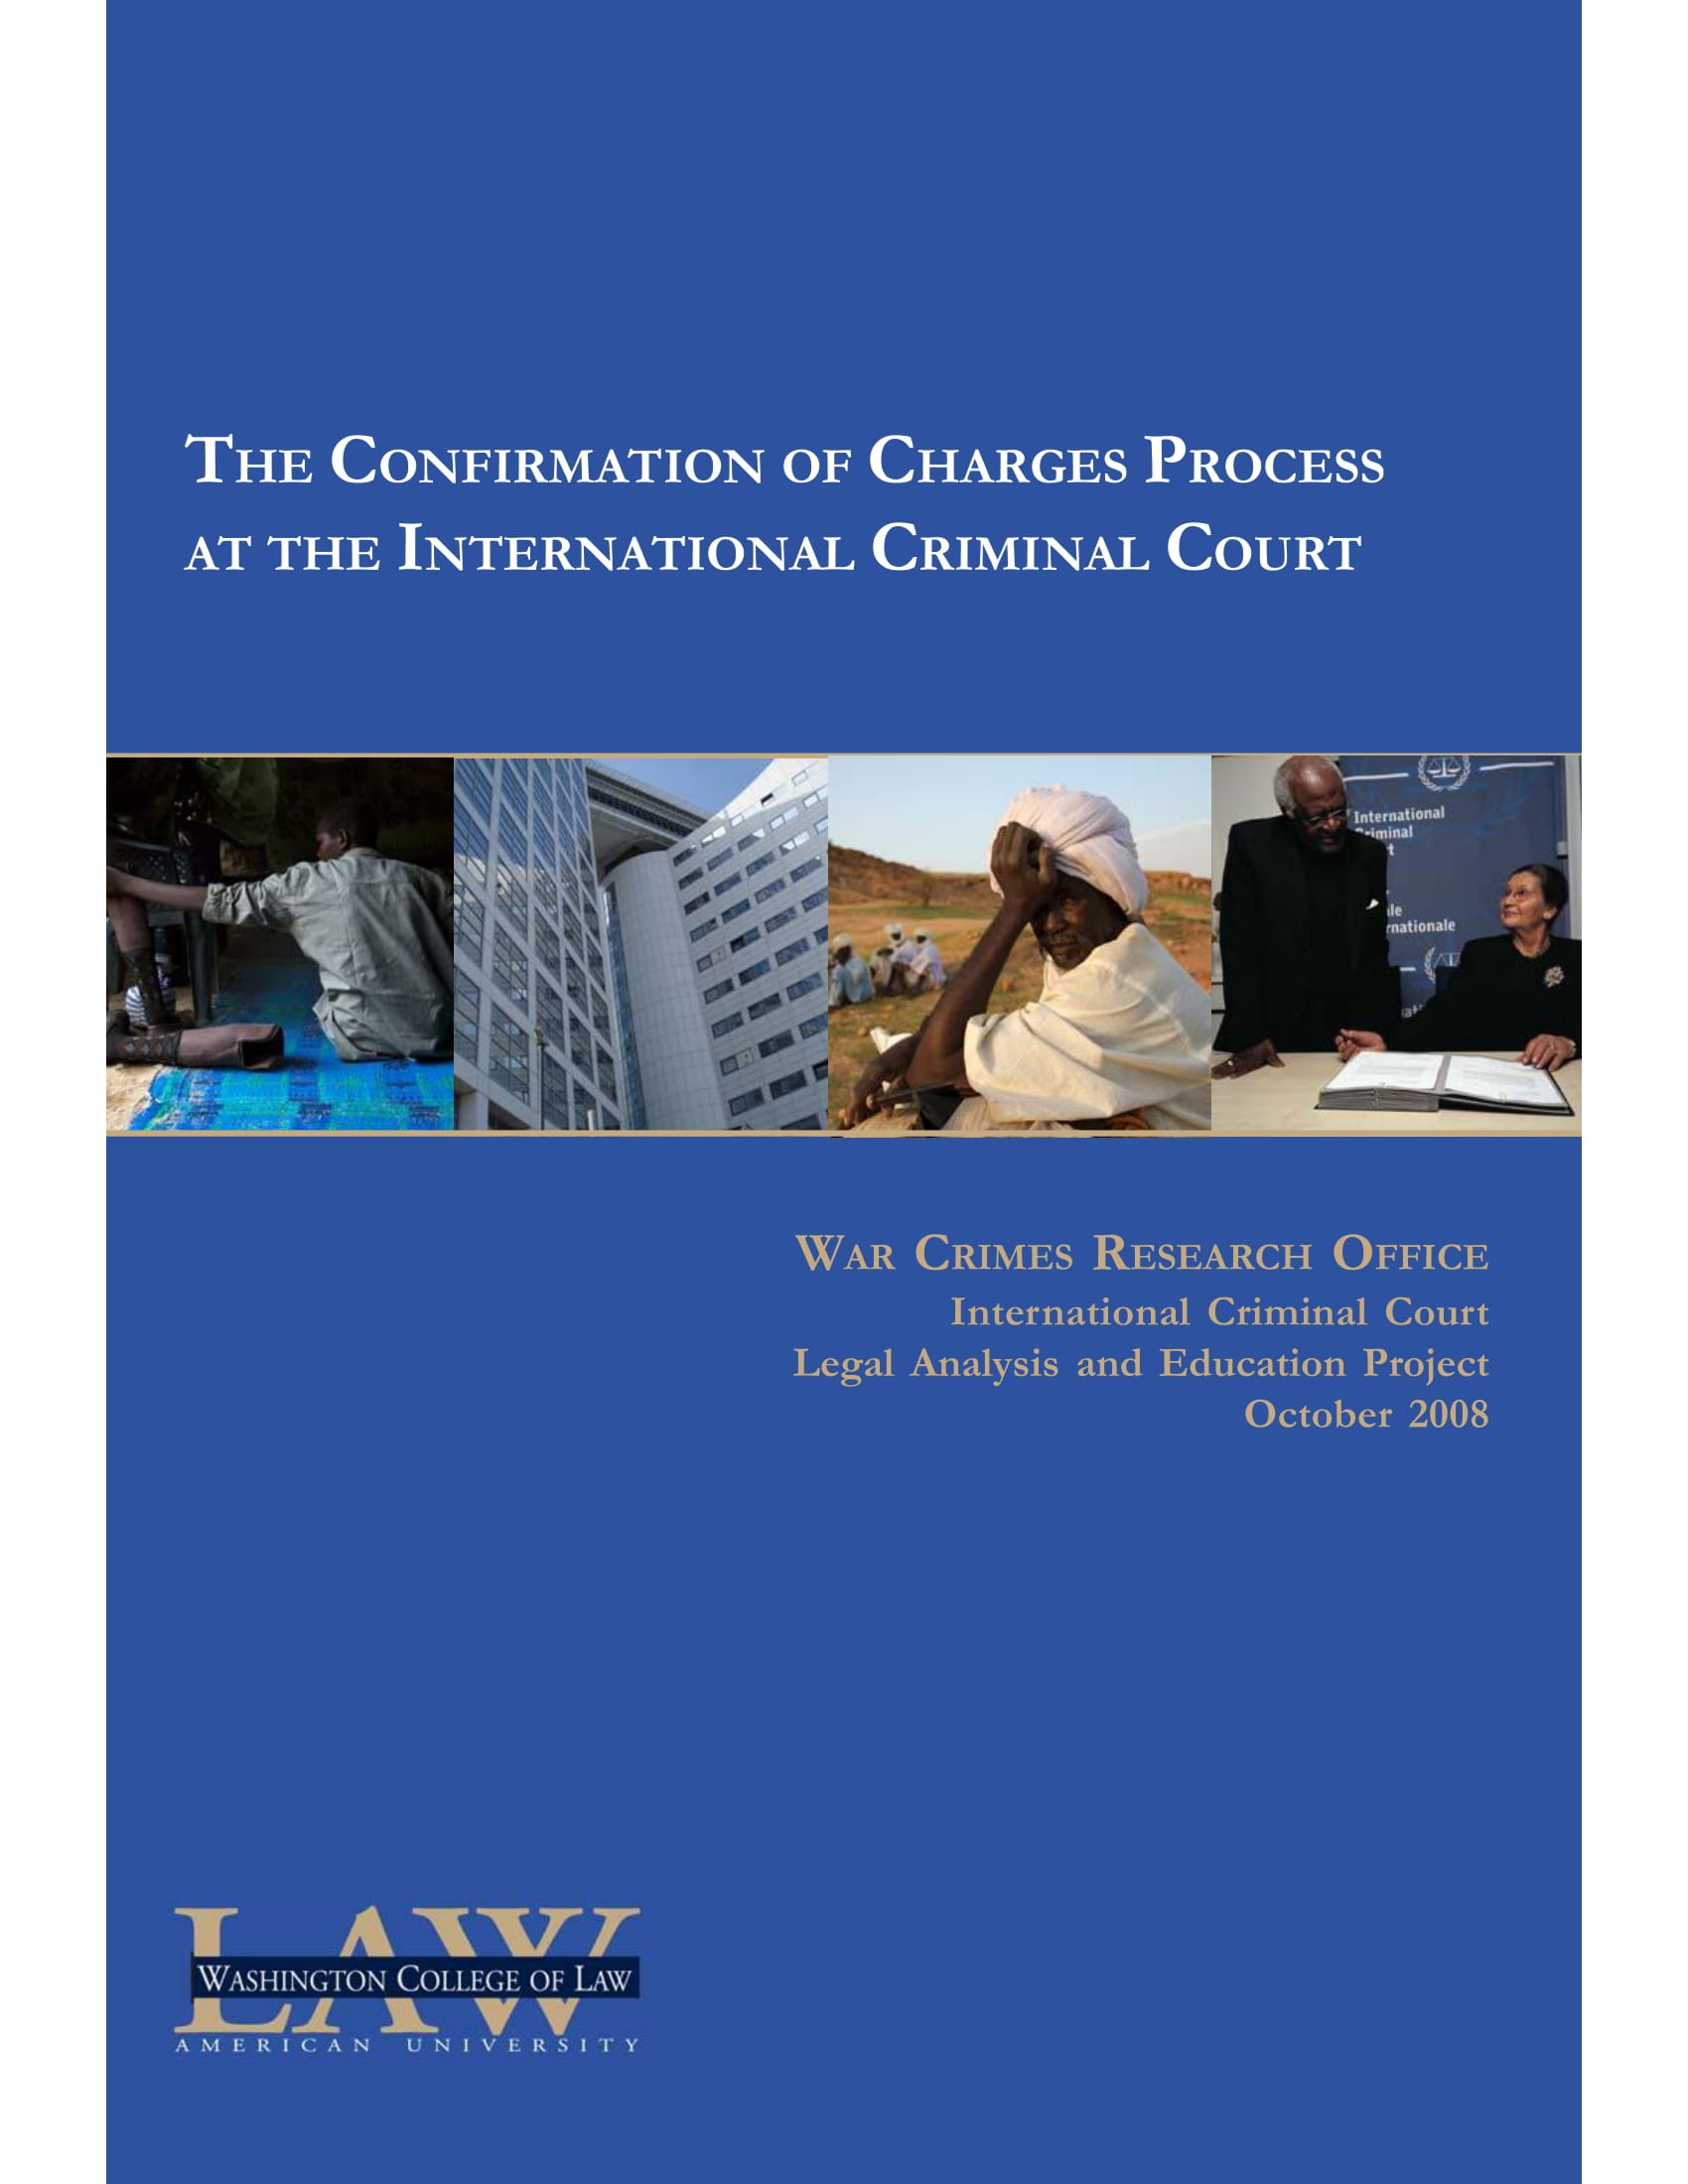 Report 5: The Confirmation of Charges Process at the International Criminal Court